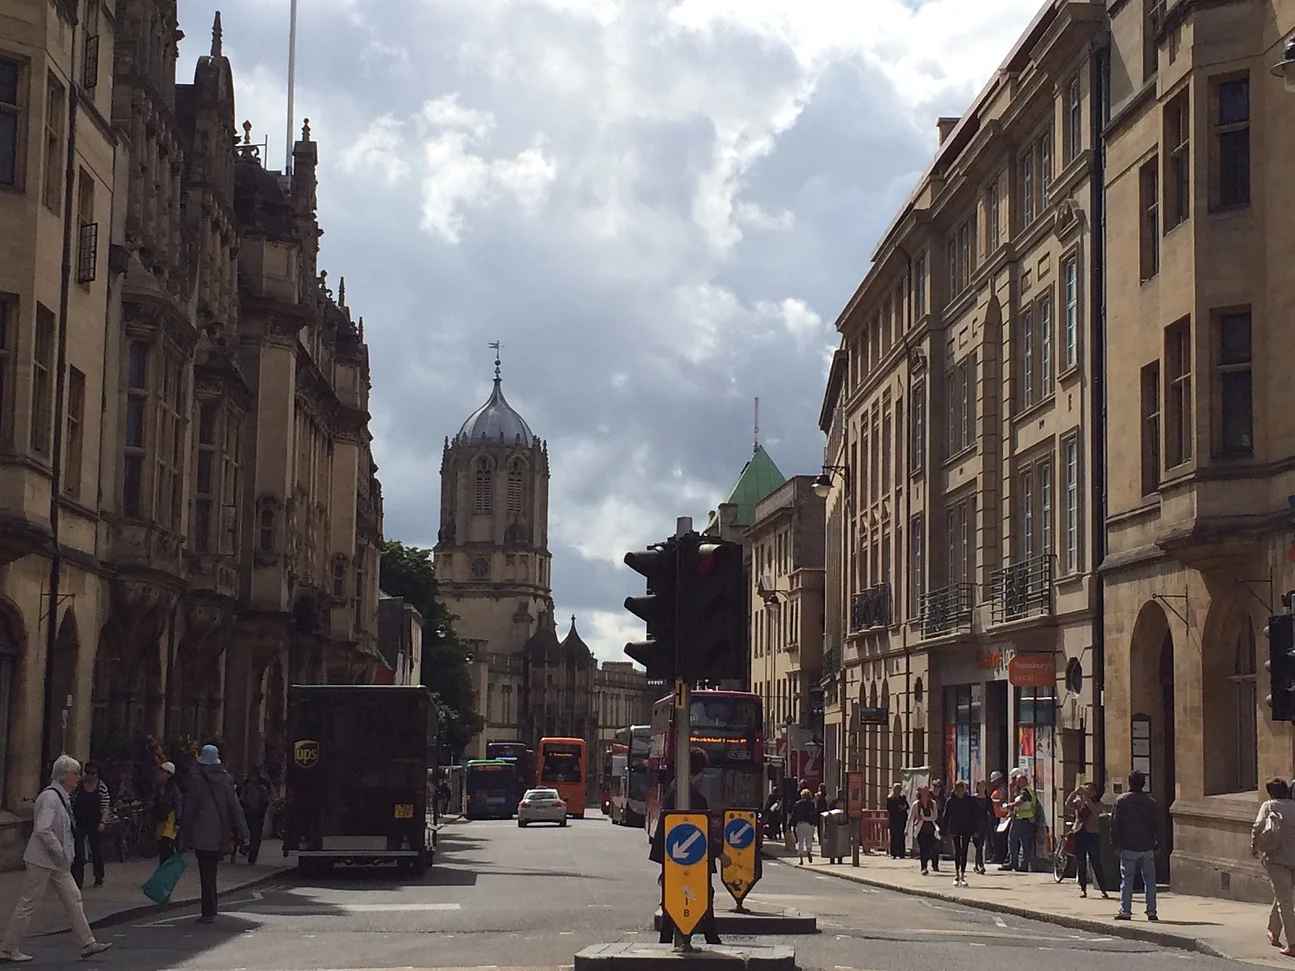 View of a road in an old town with medieval towers on the horizon: St Aldate's, a thoroughfare through the city centre, and Christ Church's Tom Tower.